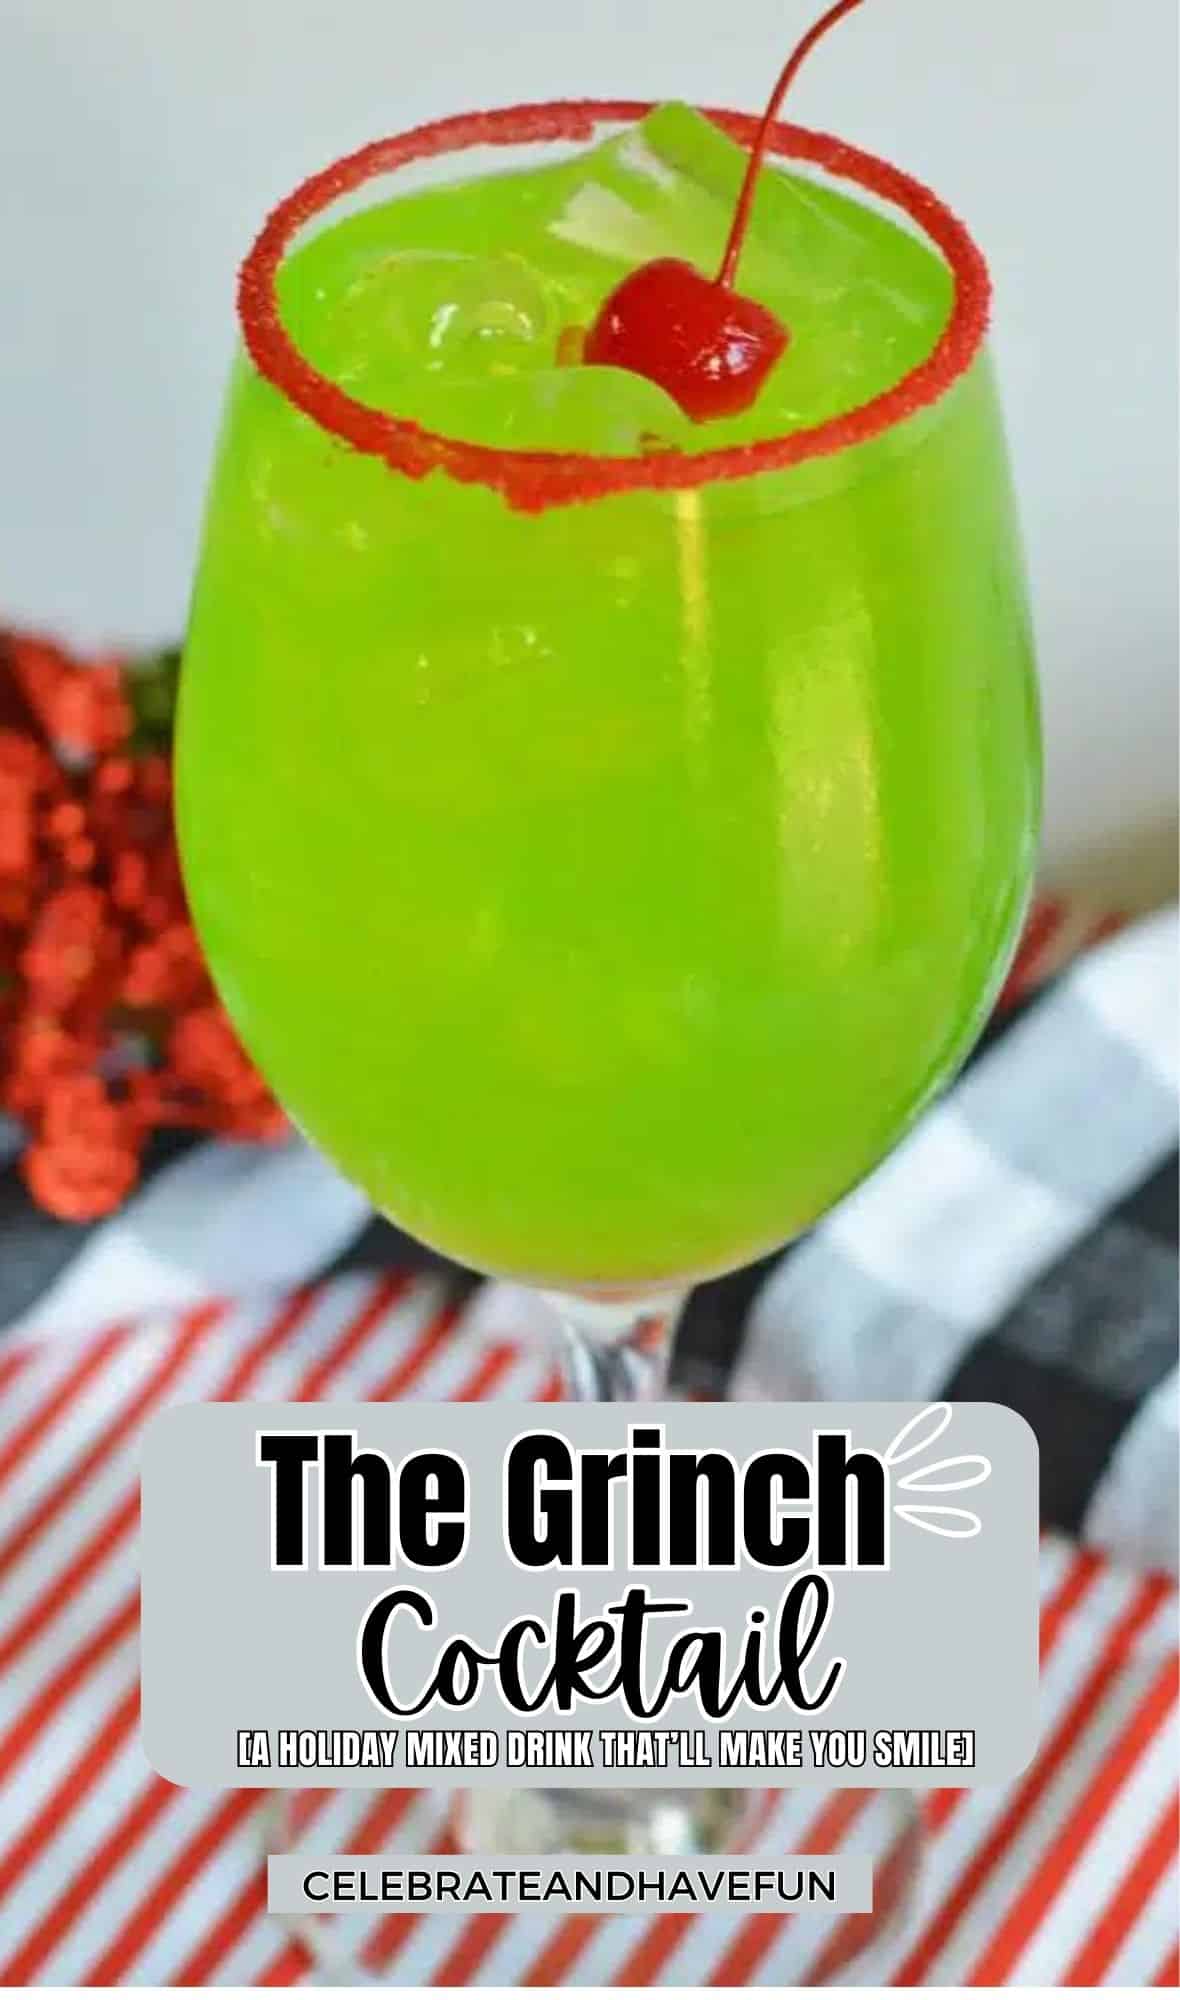 The Grinch Cocktail: A Holiday Mixed Drink That'll Make You Smile